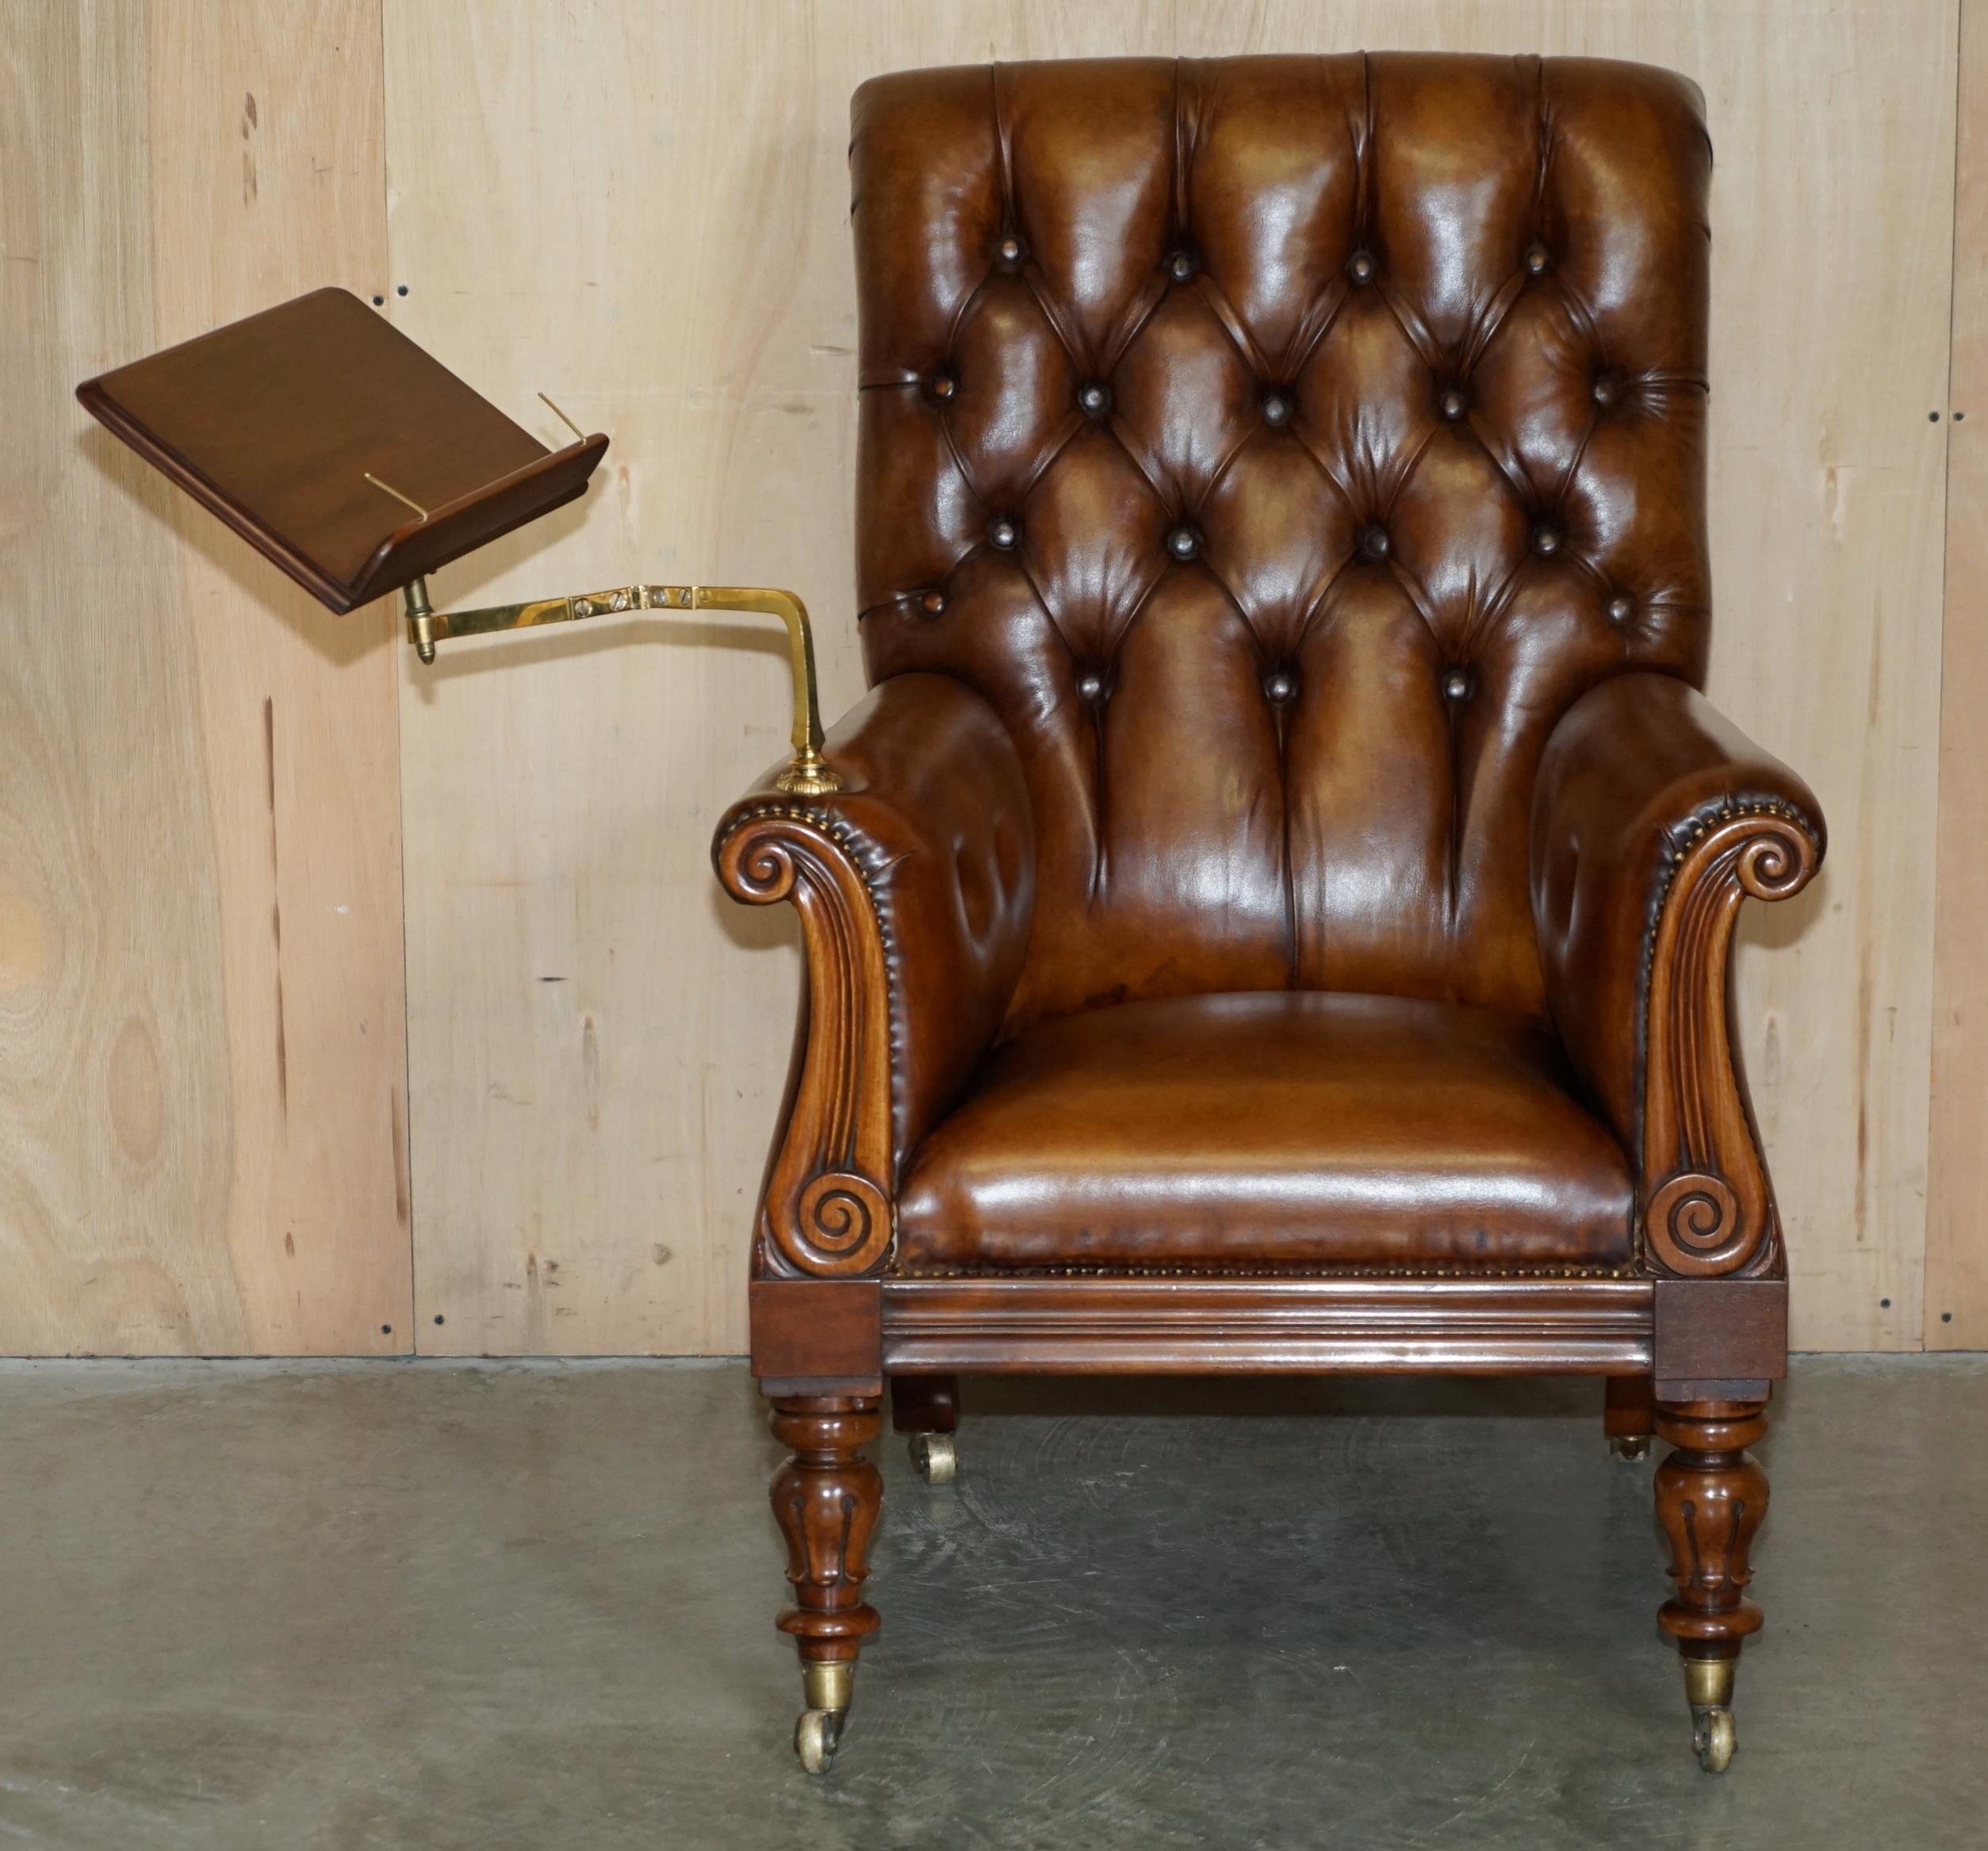 Royal House Antiques

Royal House Antiques is delighted to offer for sale this absolutely stunning fully restored hand dyed Cigar brown leather, period William IV Chesterfield Library armchair complete with original mahogany & brass reading slope